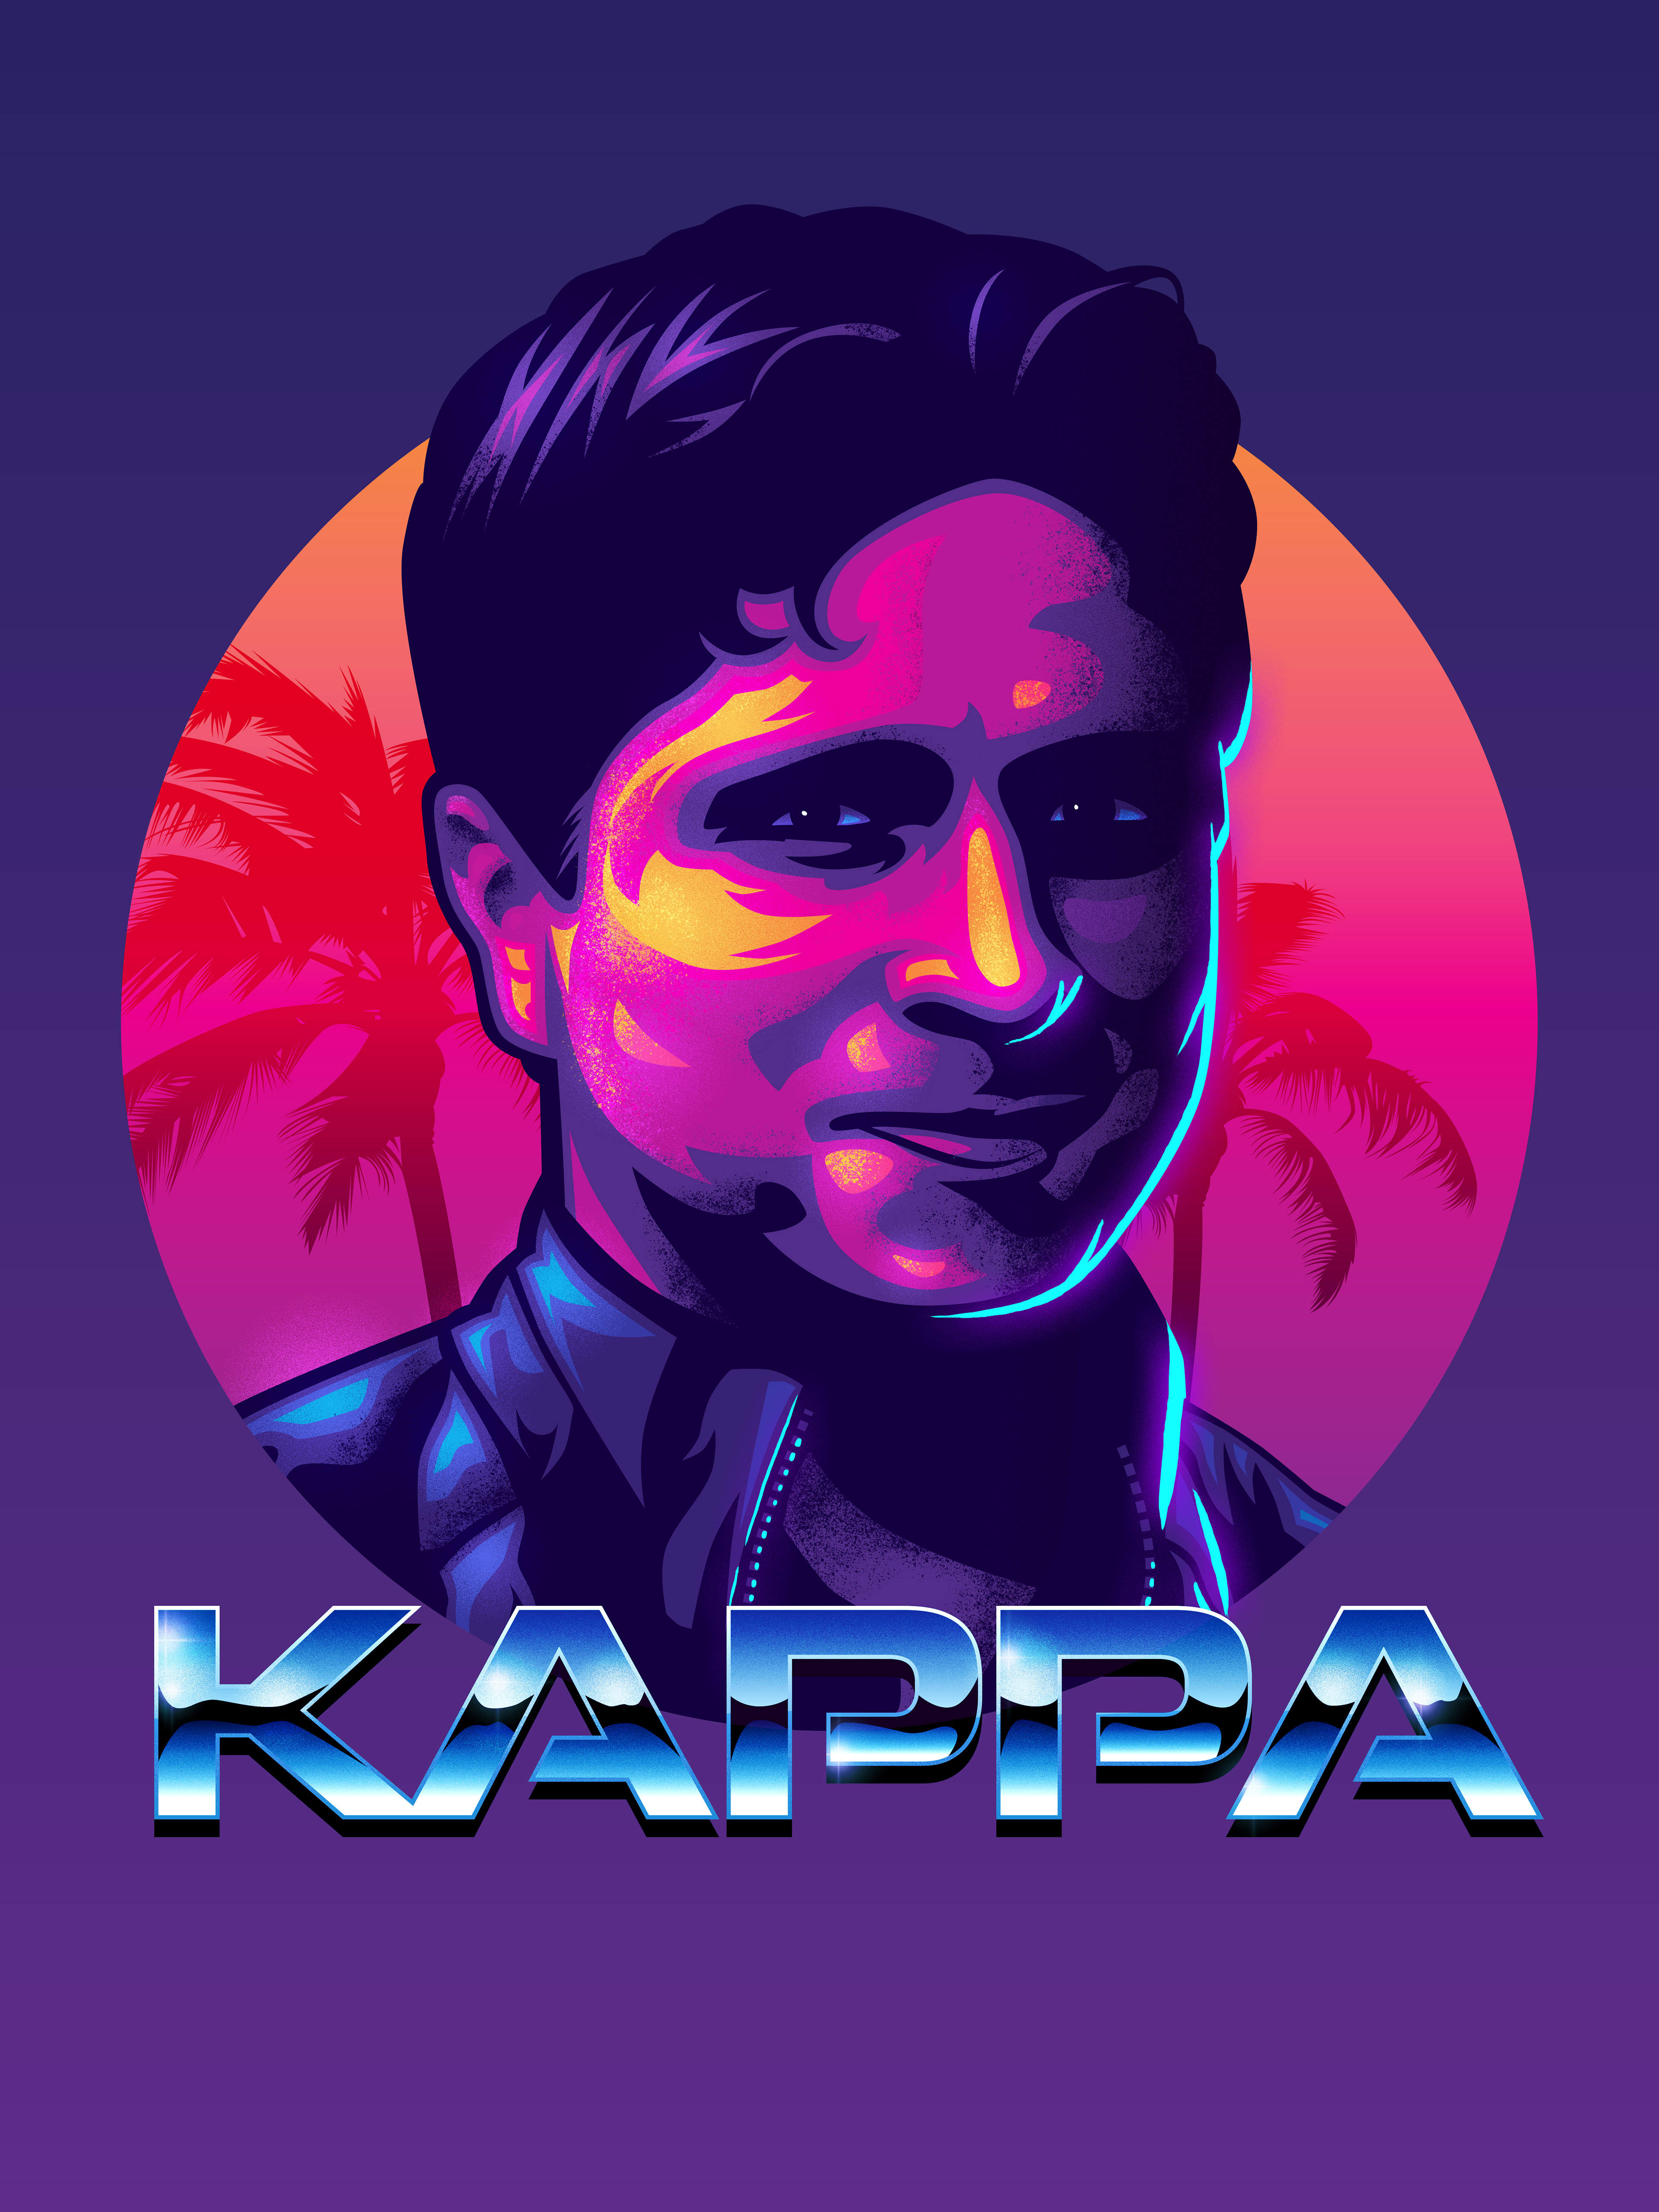 Glad Amerika lunch Signalnoise :: The Work of James White - Twitch X SignalNoise